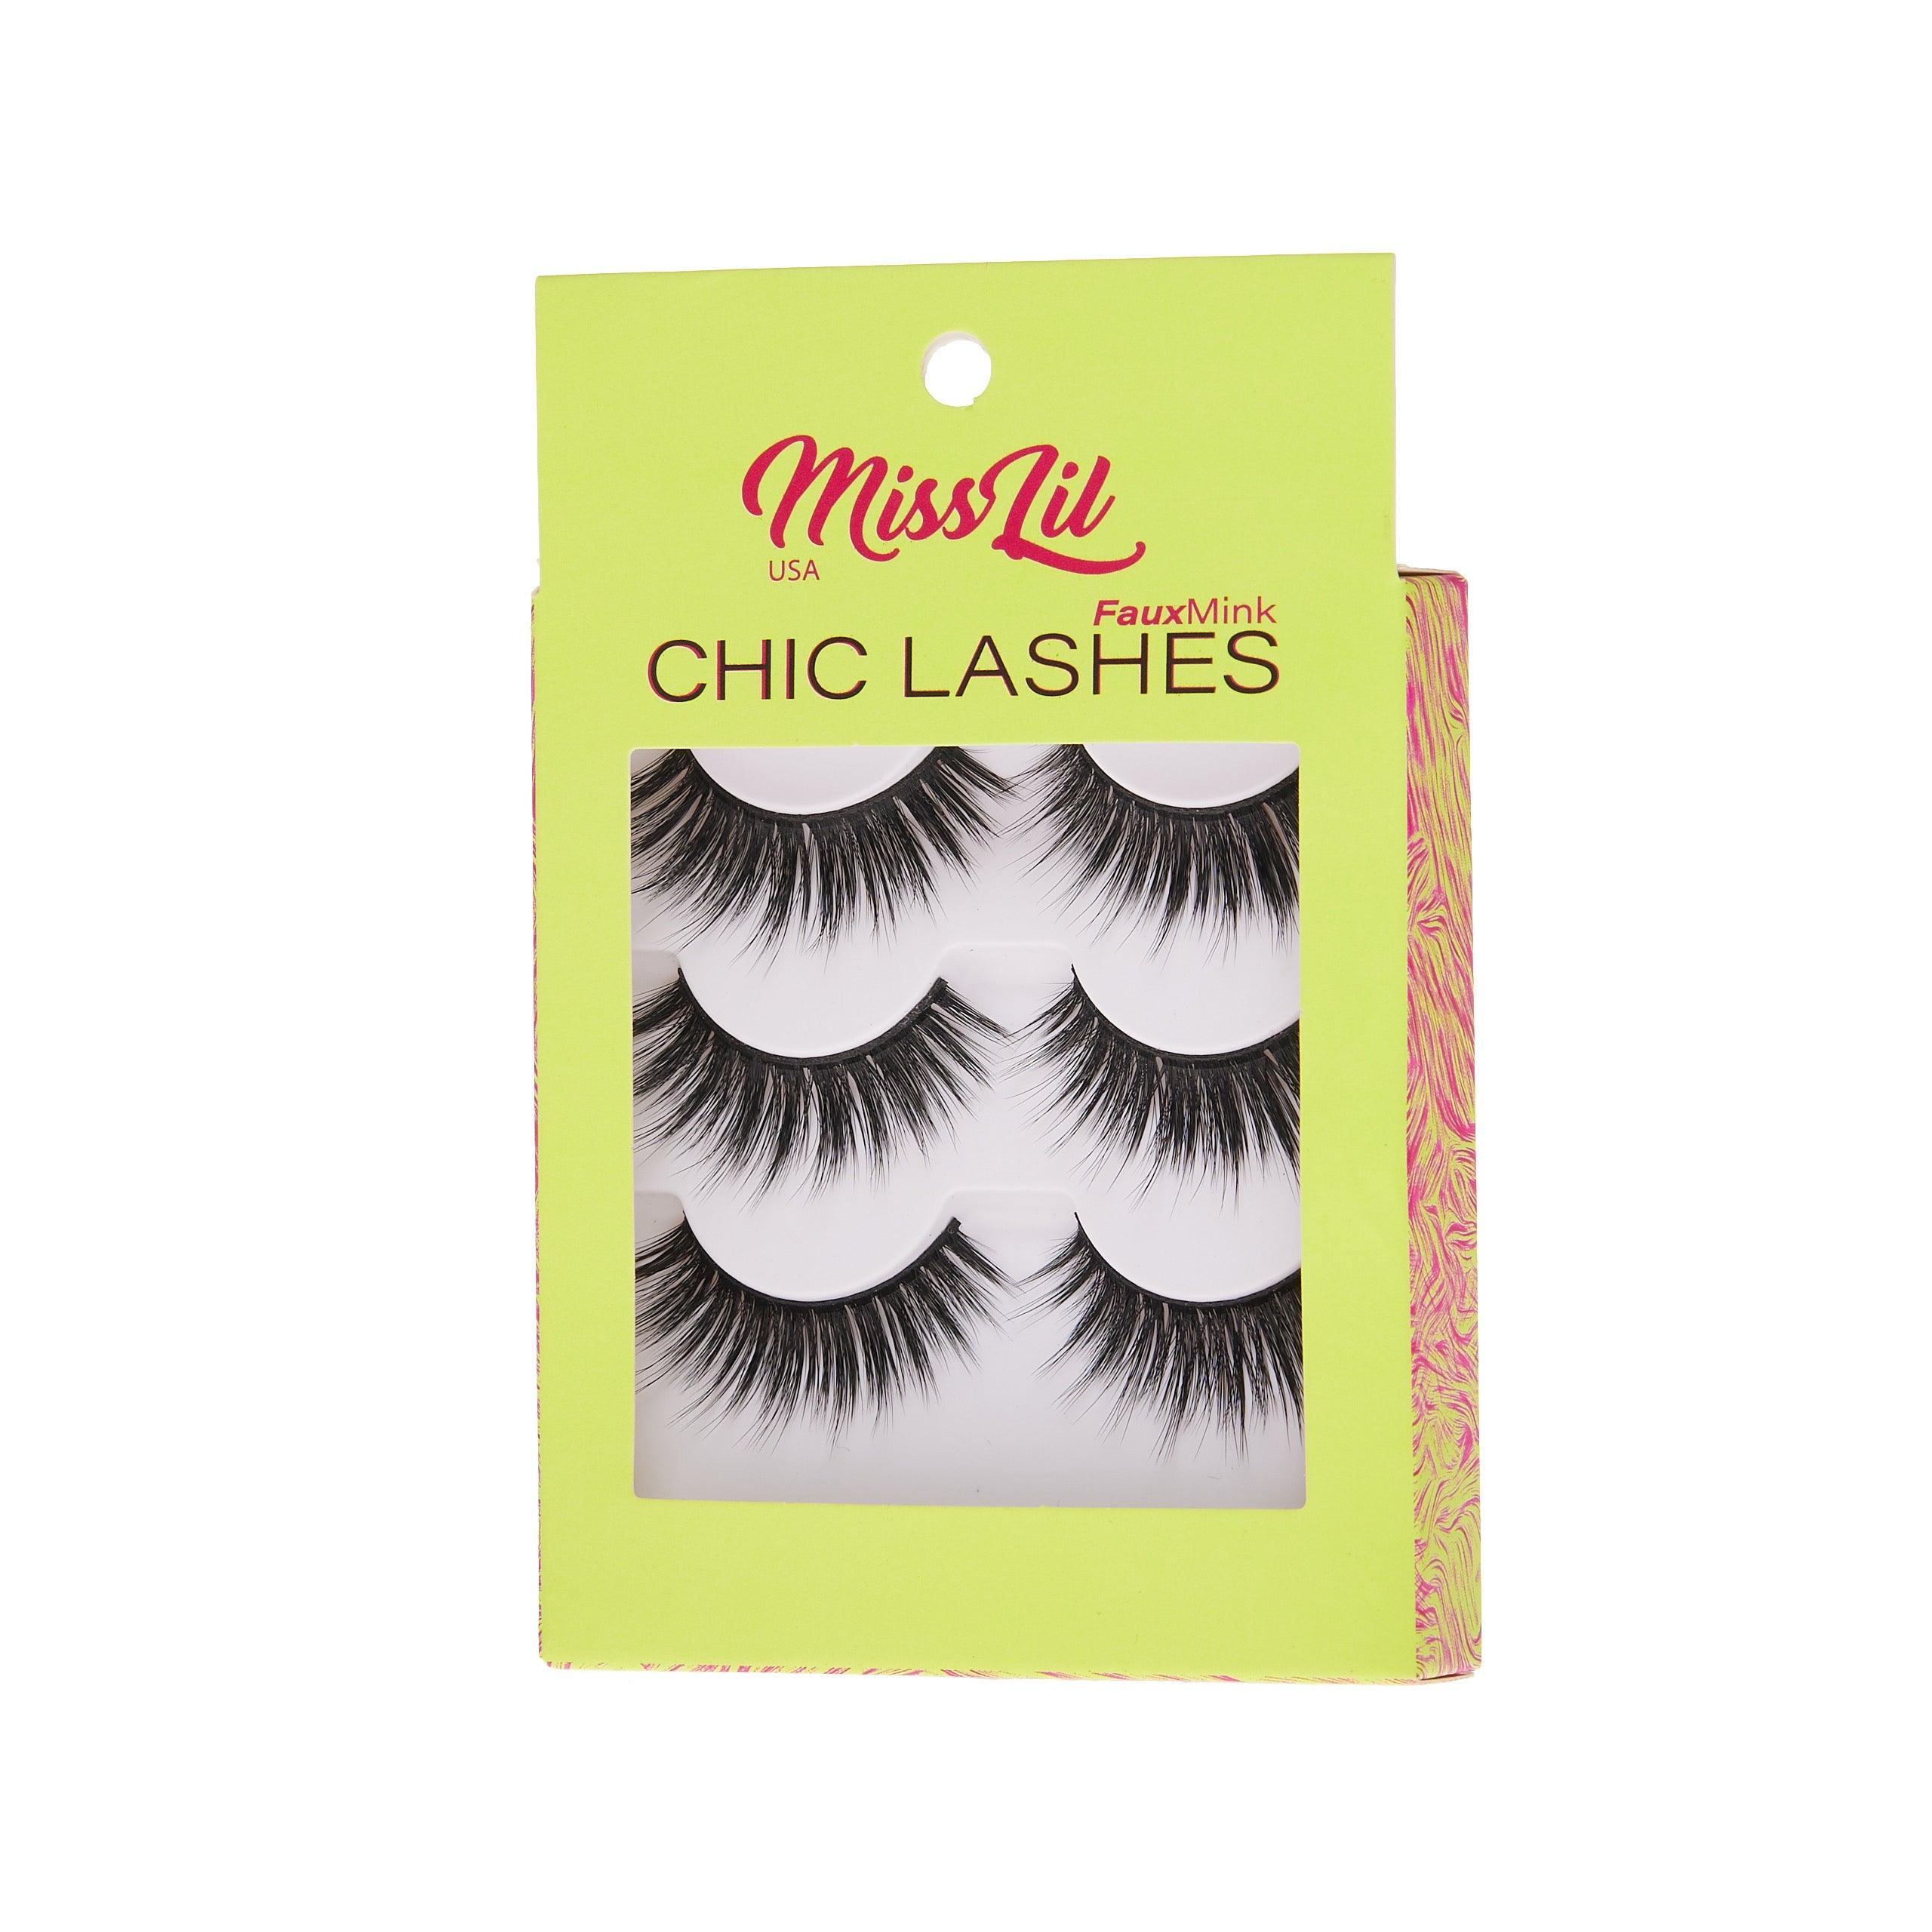 3-Pair Faux Mink Eyelashes - Chic Lashes Collection #1 - Pack of 3 - Miss Lil USA